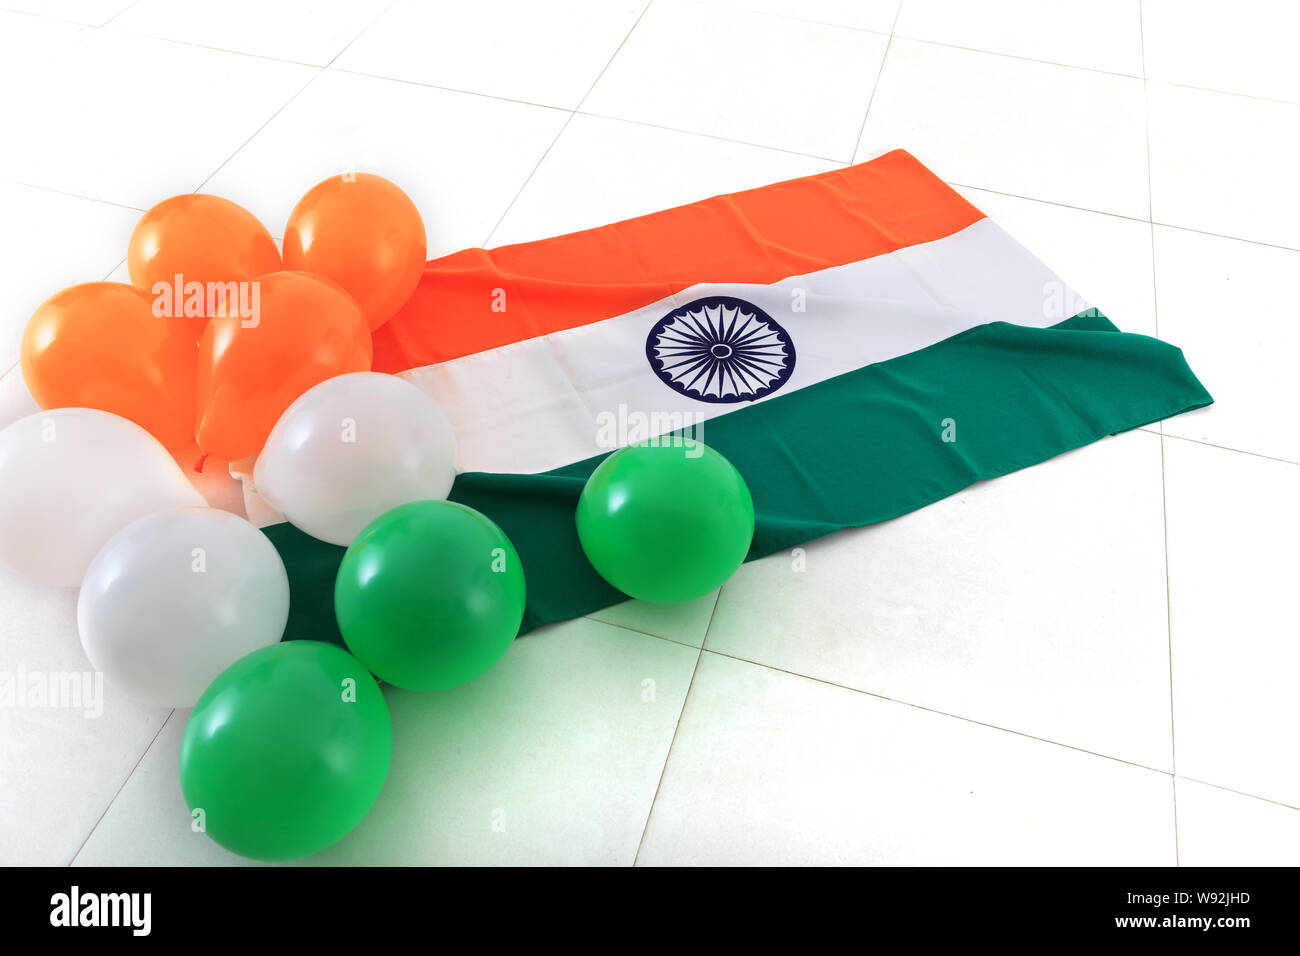 Indian flag with balloons Stock Photo